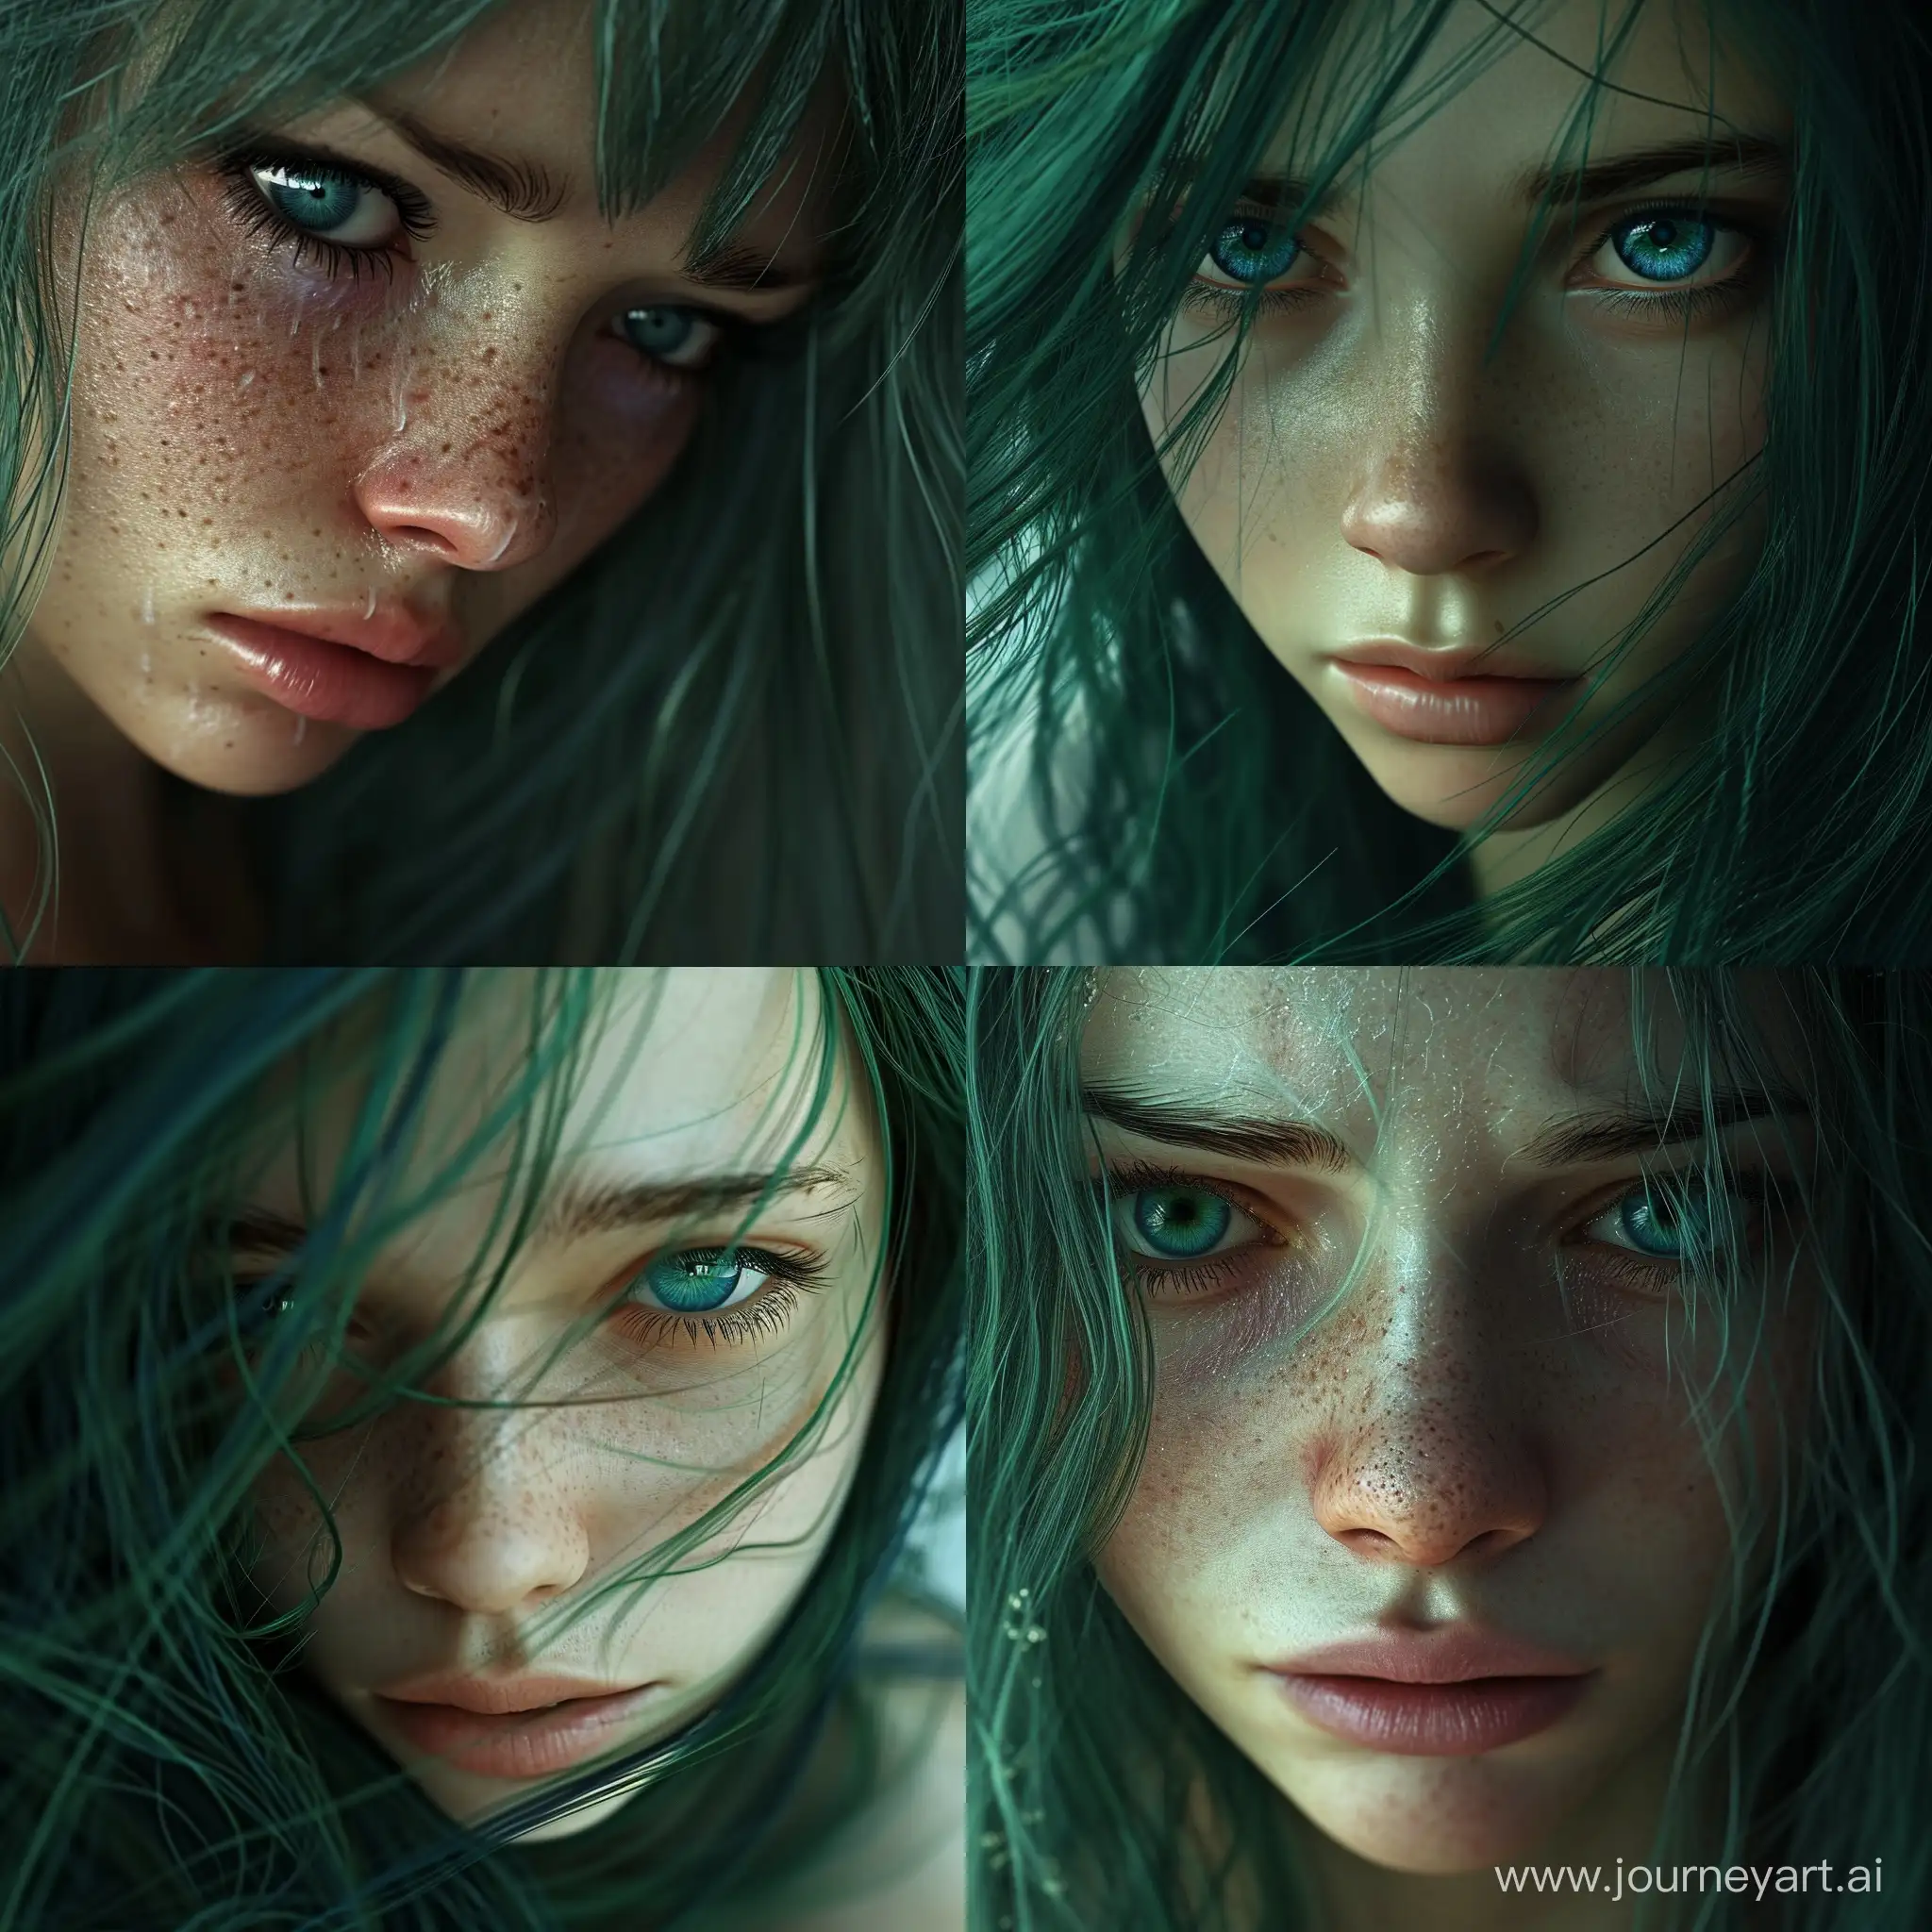 Profound-Sorrow-Portrait-of-a-Depressed-Girl-with-Striking-Blue-Eyes-and-Green-Hair